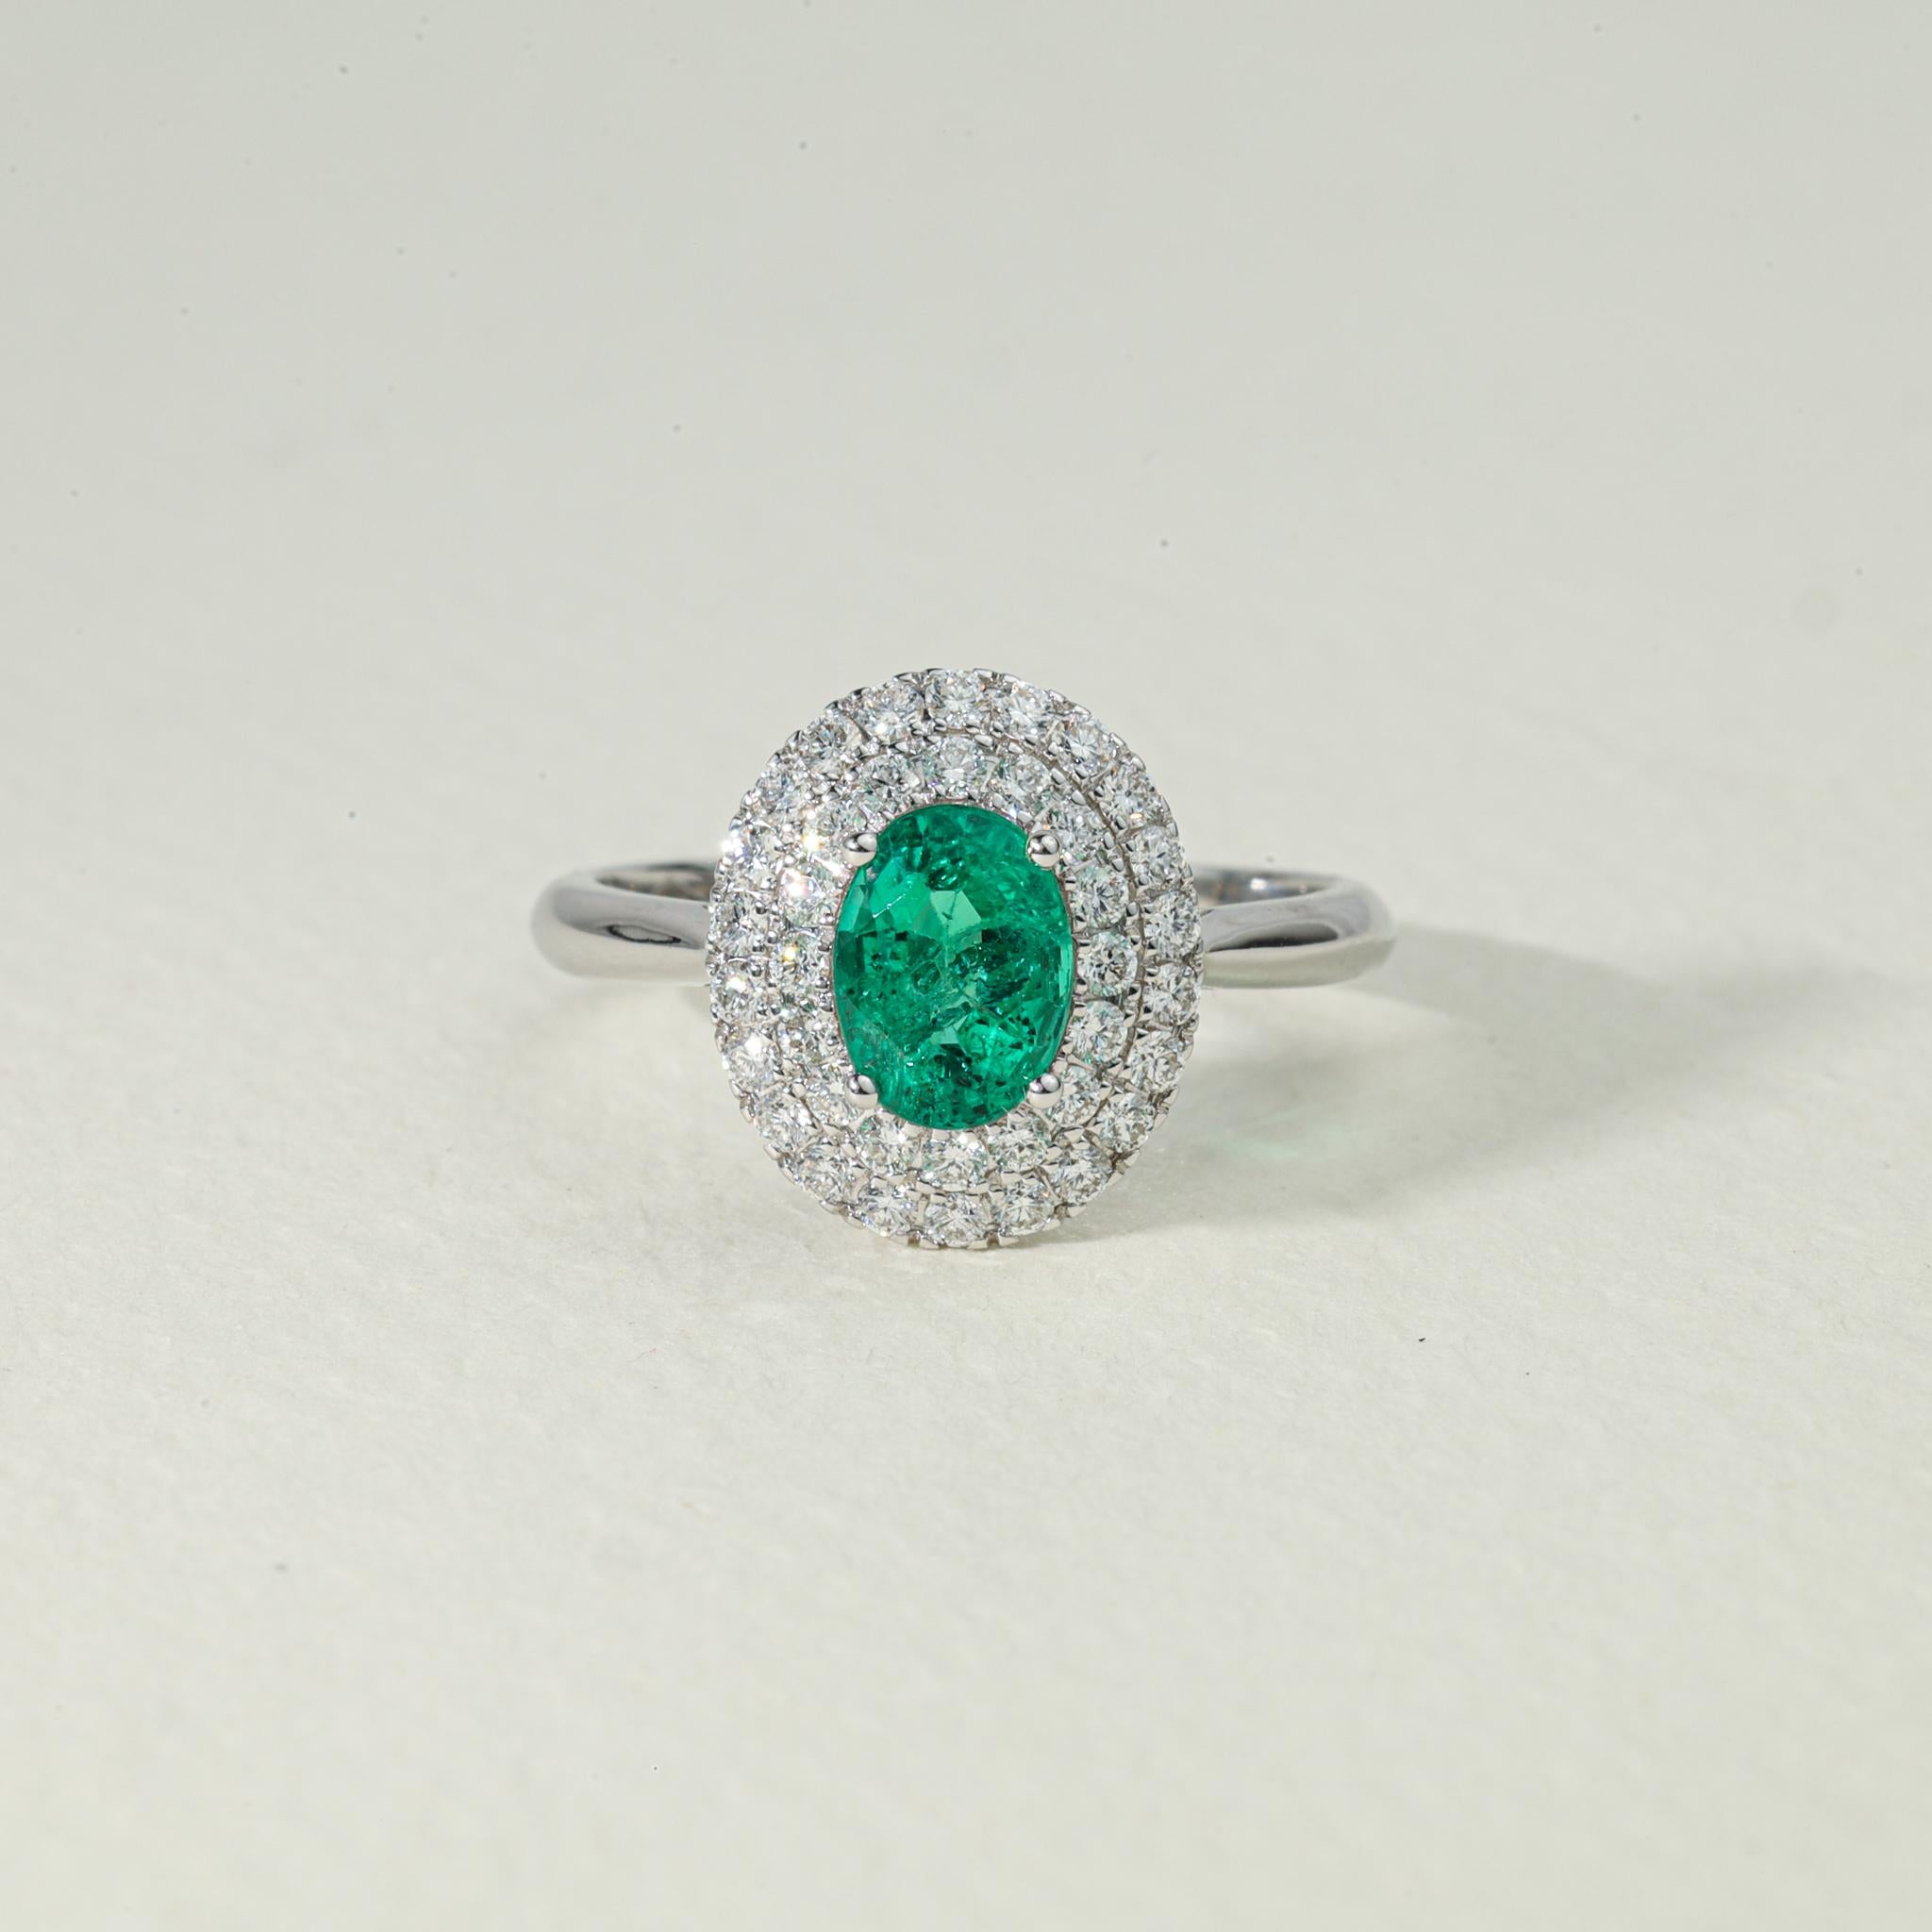 Oval Natural Emerald Diamond Double Halo Cocktail Engagement Ring 18k White Gold

Available in 18k white gold.

Same design can be made also with other custom gemstones per request.

Product details:

- Solid gold

- Diamond - approx. 0.55 carat

-